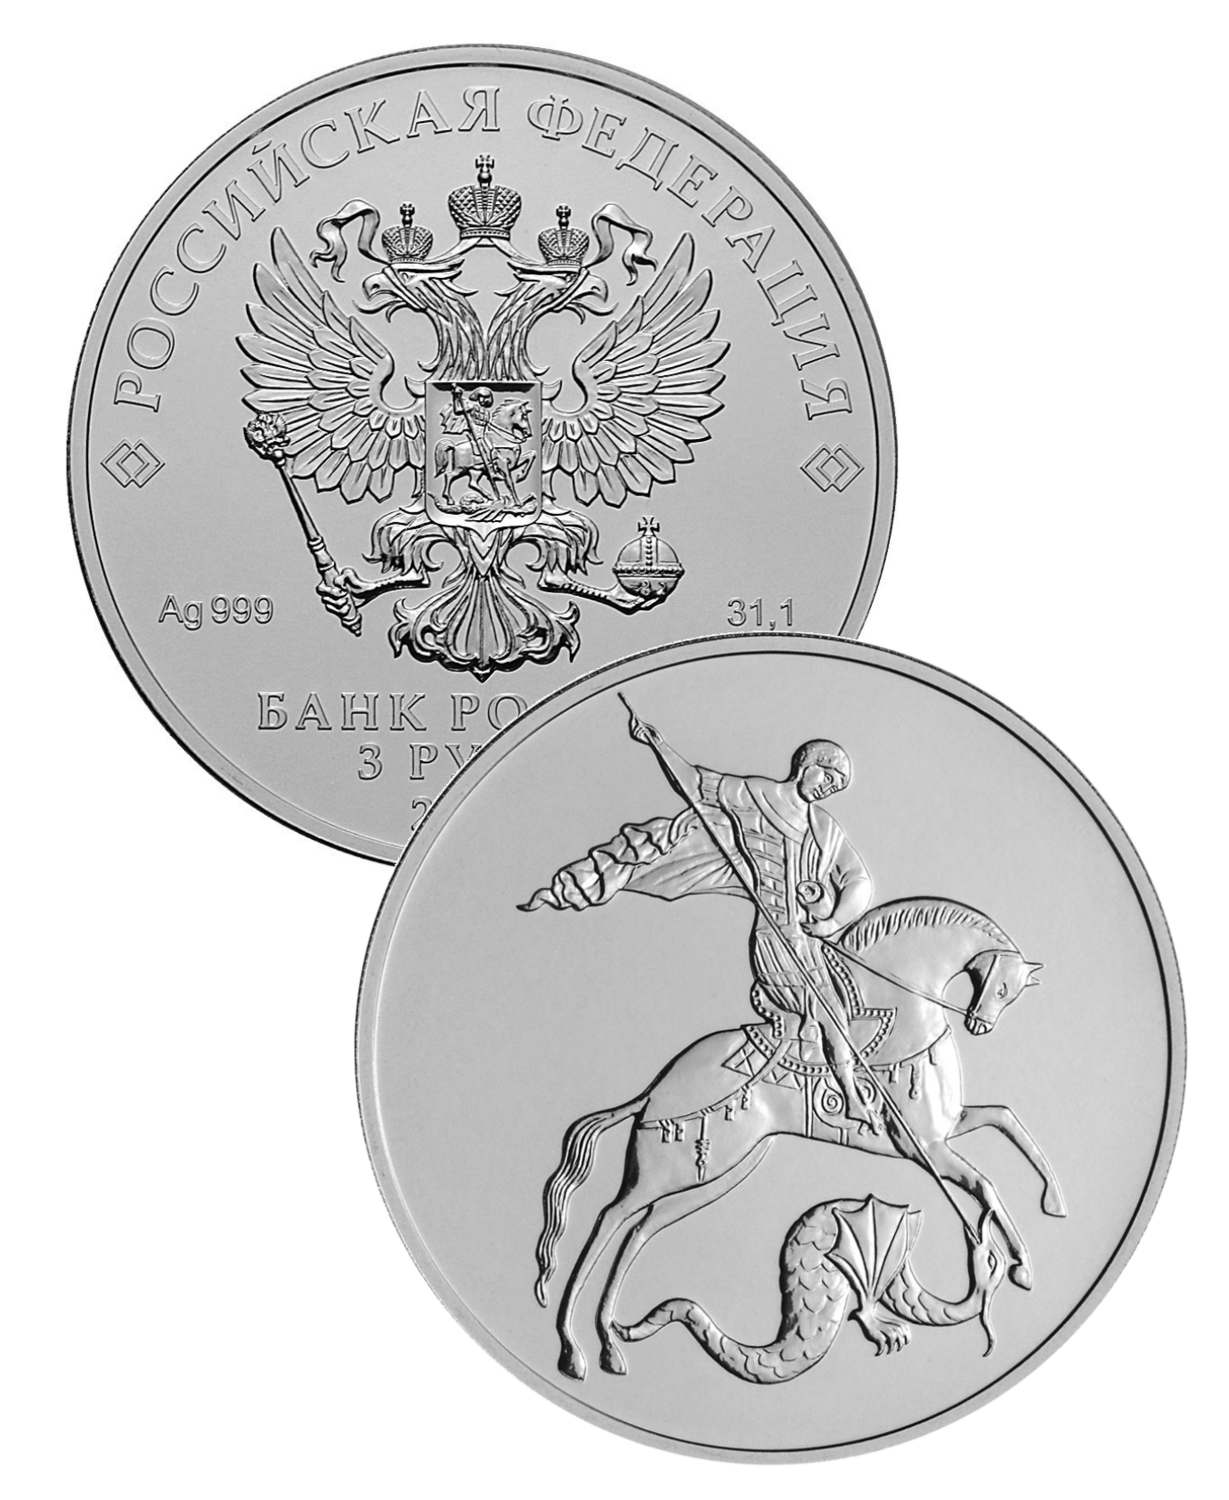 Russia. 2020. 3 Rubles. SPMD. George the Victorious. Silver 999. 1.0 Oz ASW 31.5 g. UNC Mintage: <300,000